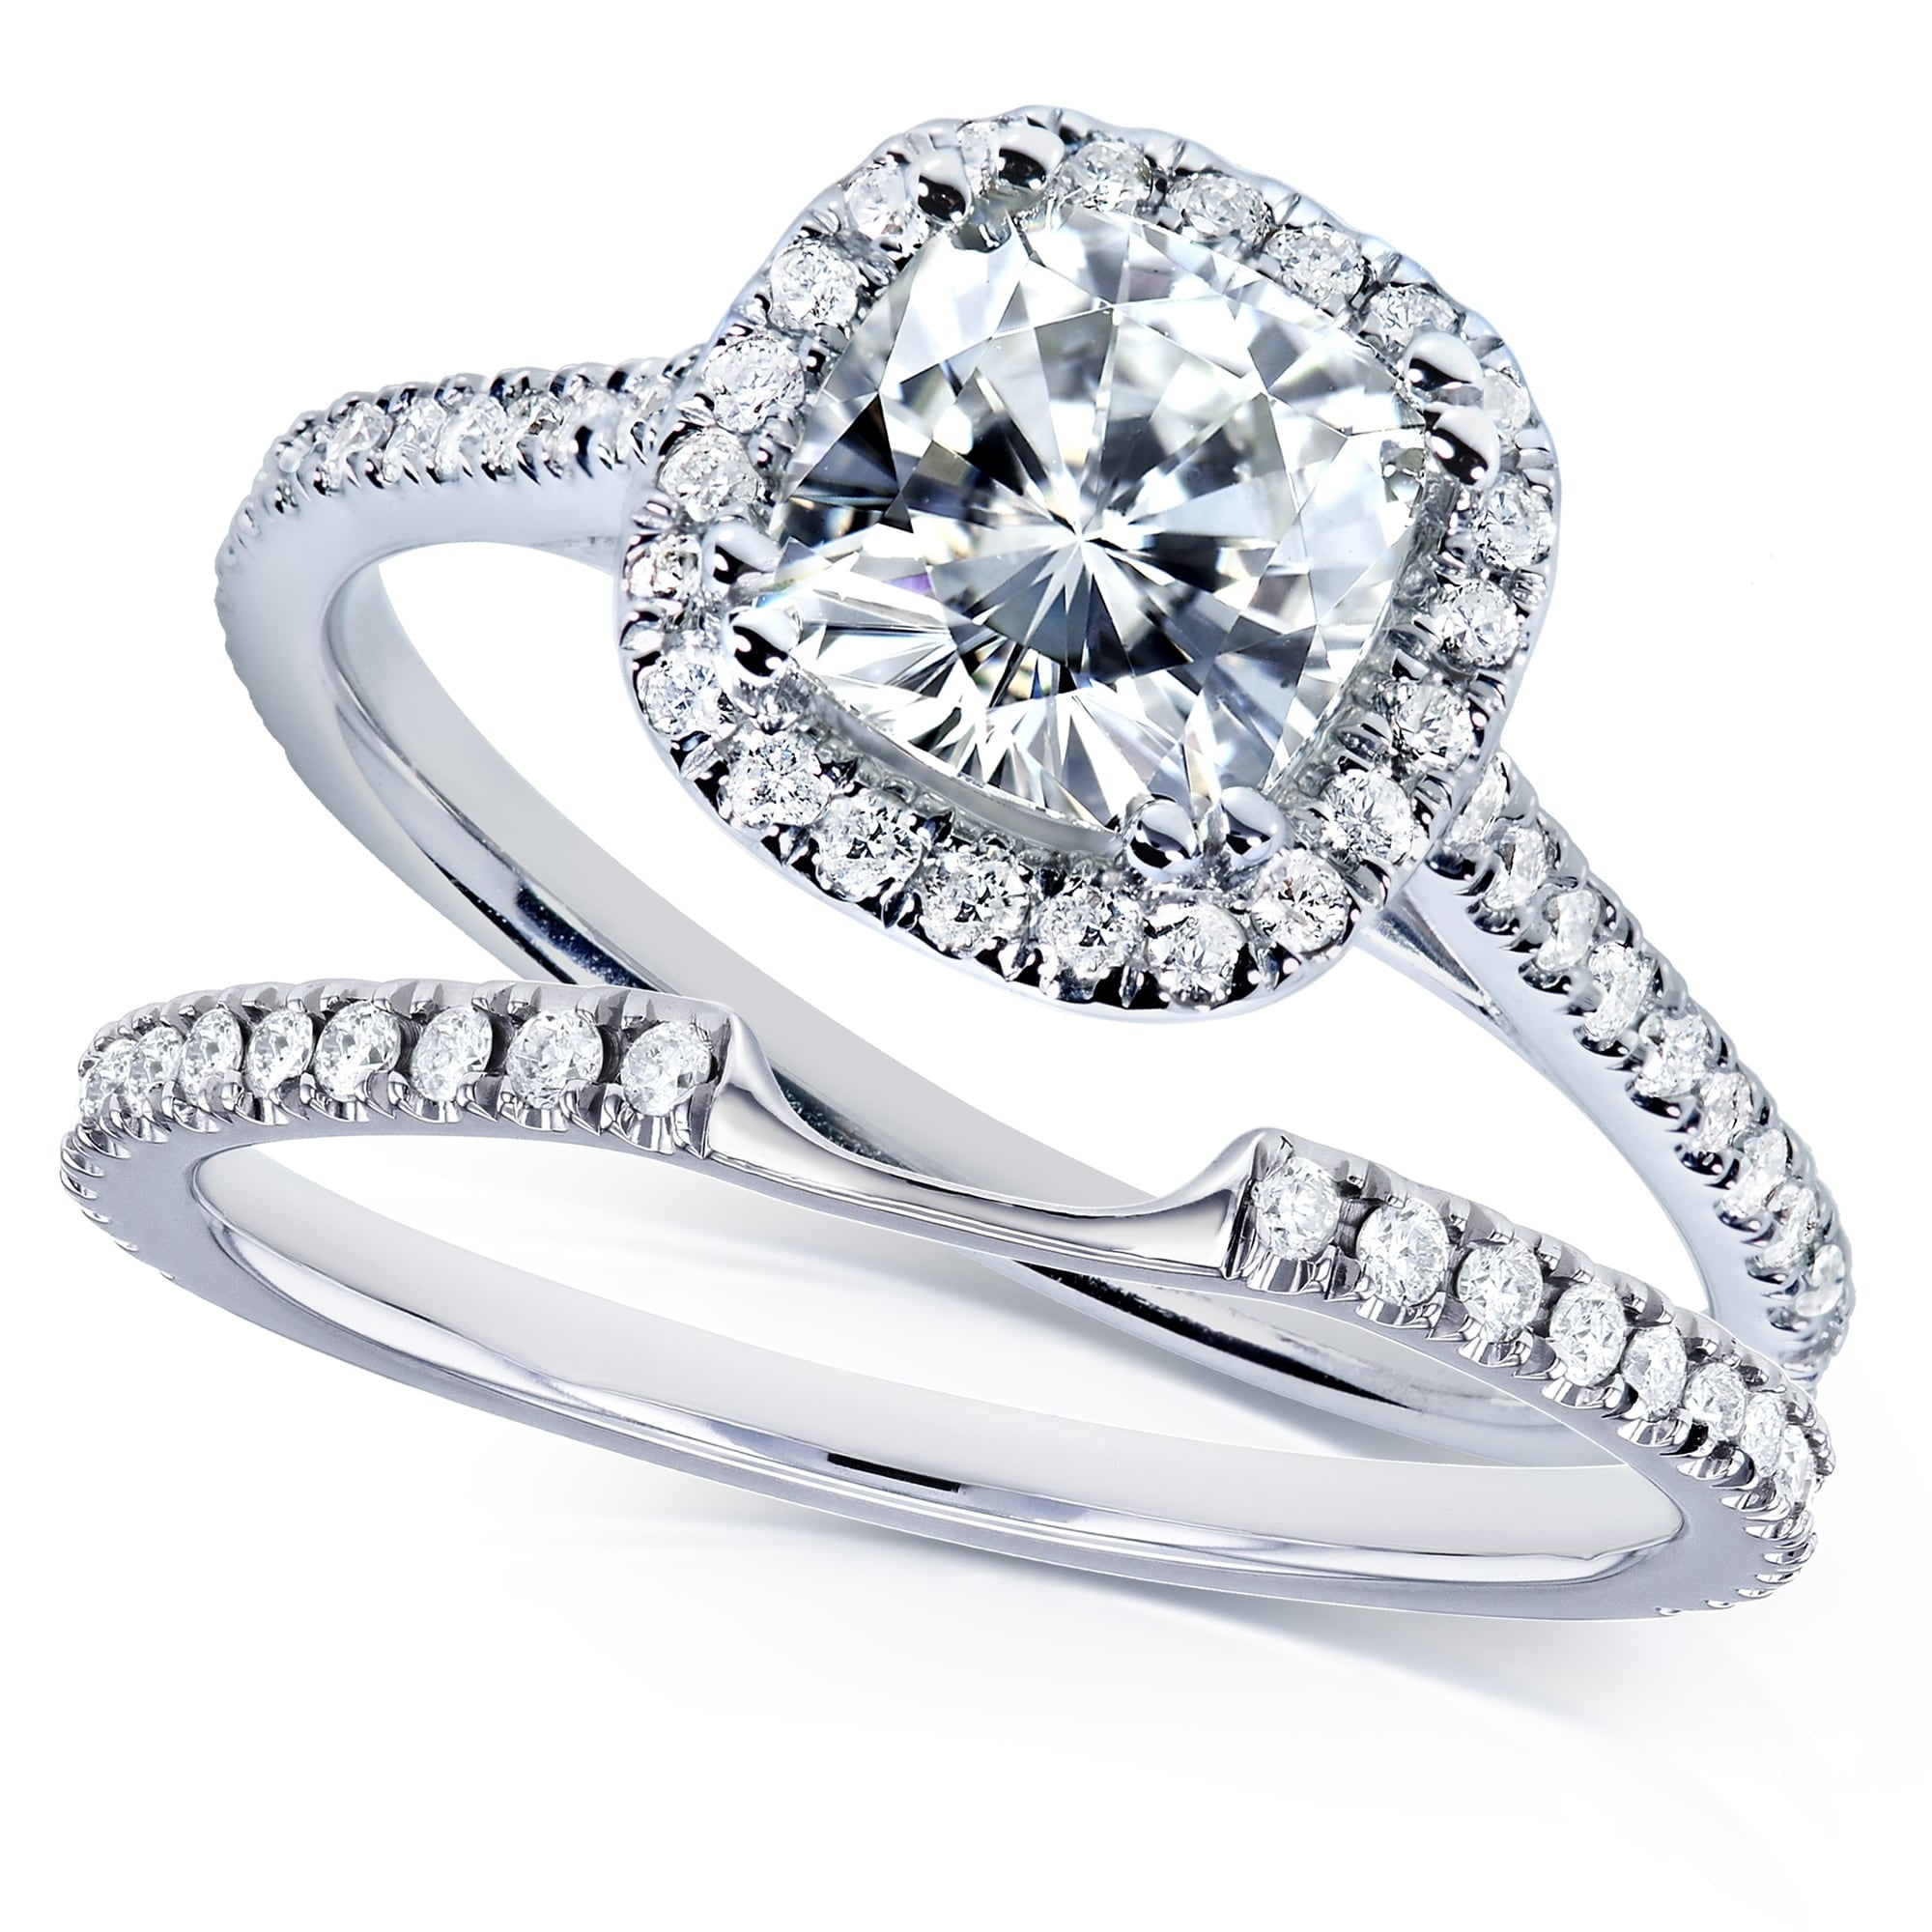 Details about   Round Cubic Zirconia Band Ring Women Engagement Jewelry 14K White Gold Plated 